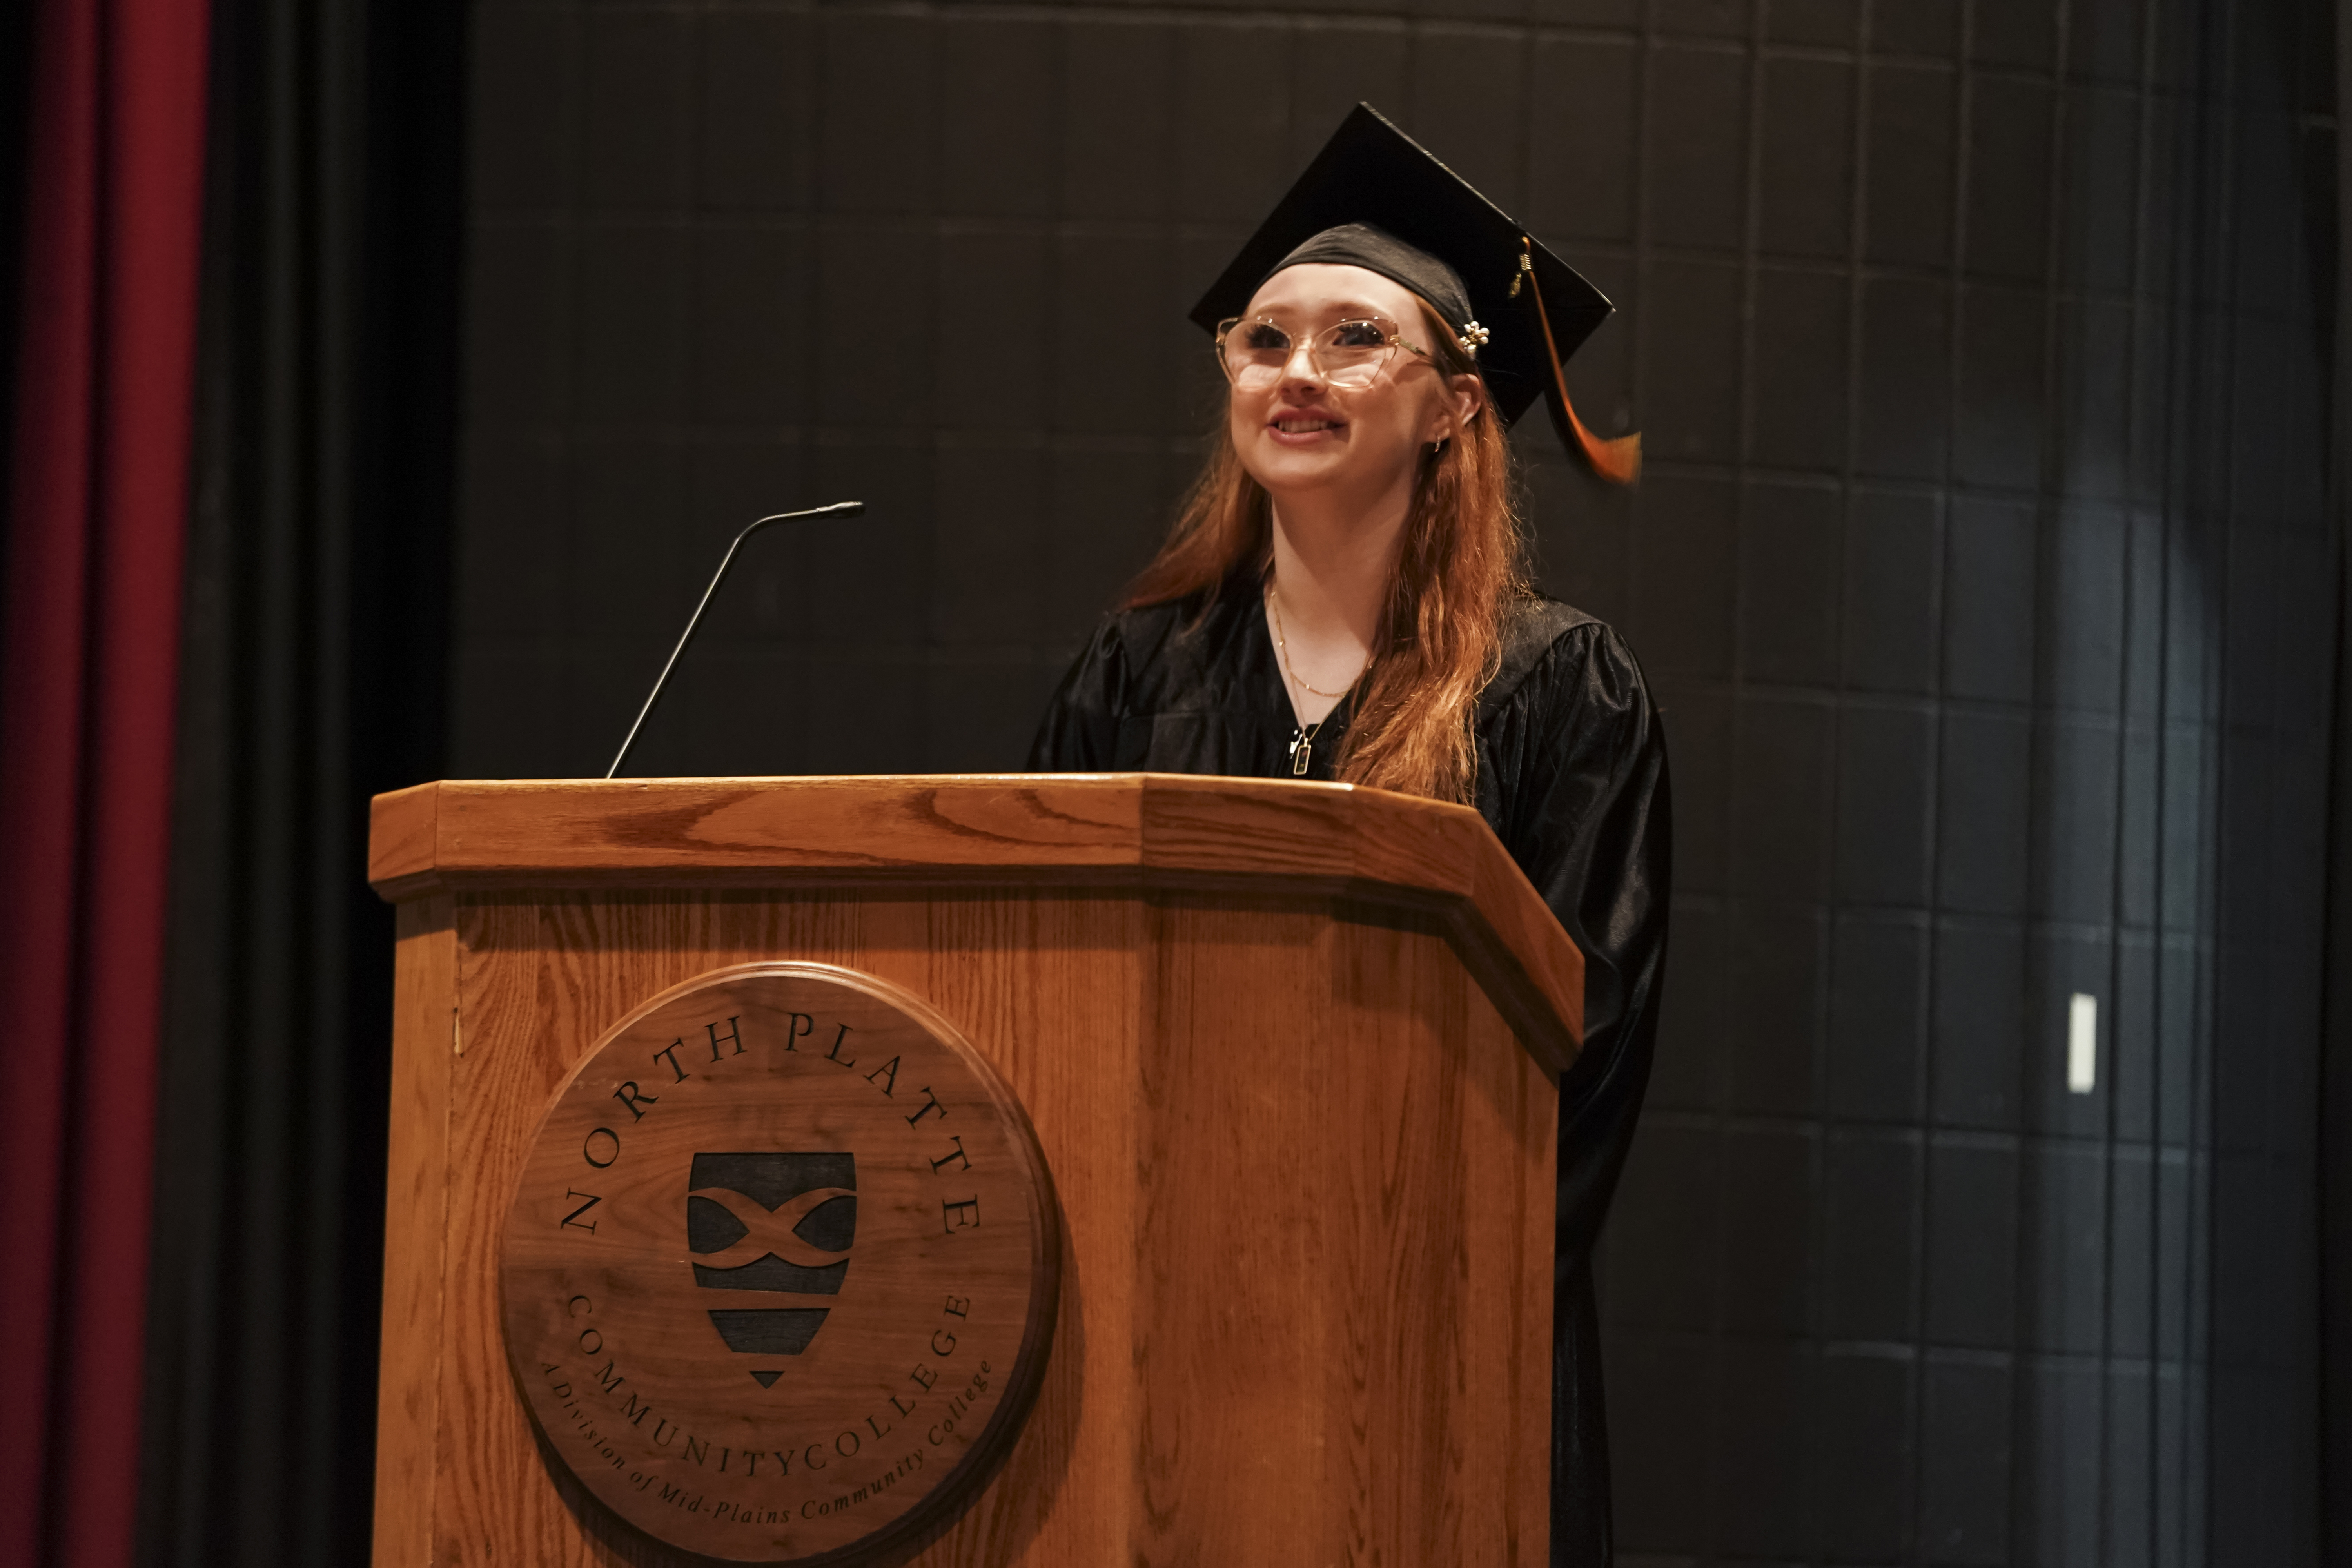 Emmajo Mahler addresses classmates, friends and family during the GED® ceremony at the McDonald-Belton Theater on Wednesday evening.